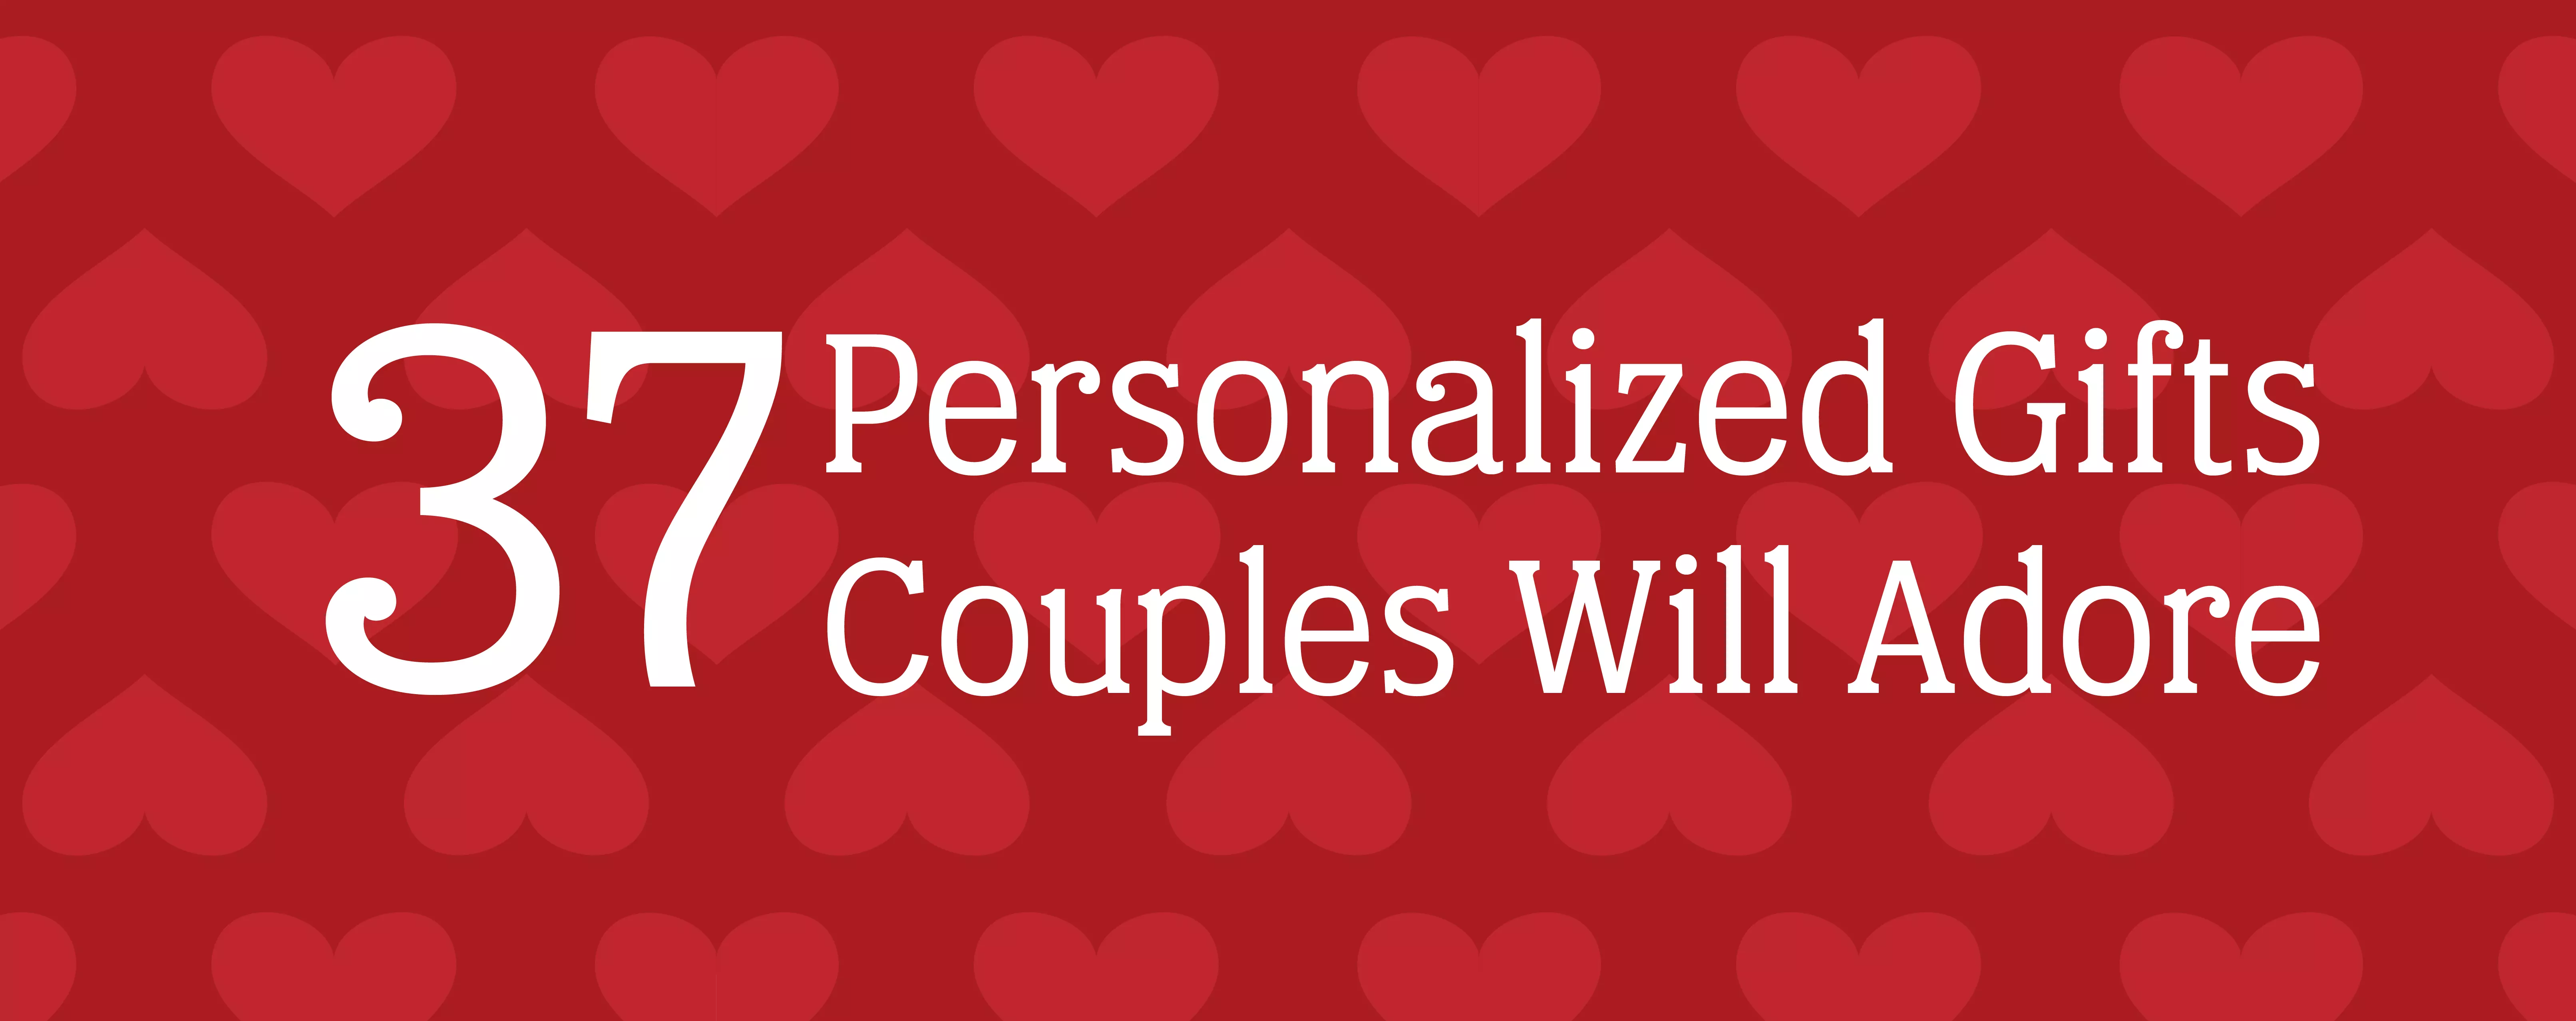 Red heart pattern background with a white text overlay that reads "37 Personalized Gifts Couples Will Adore"